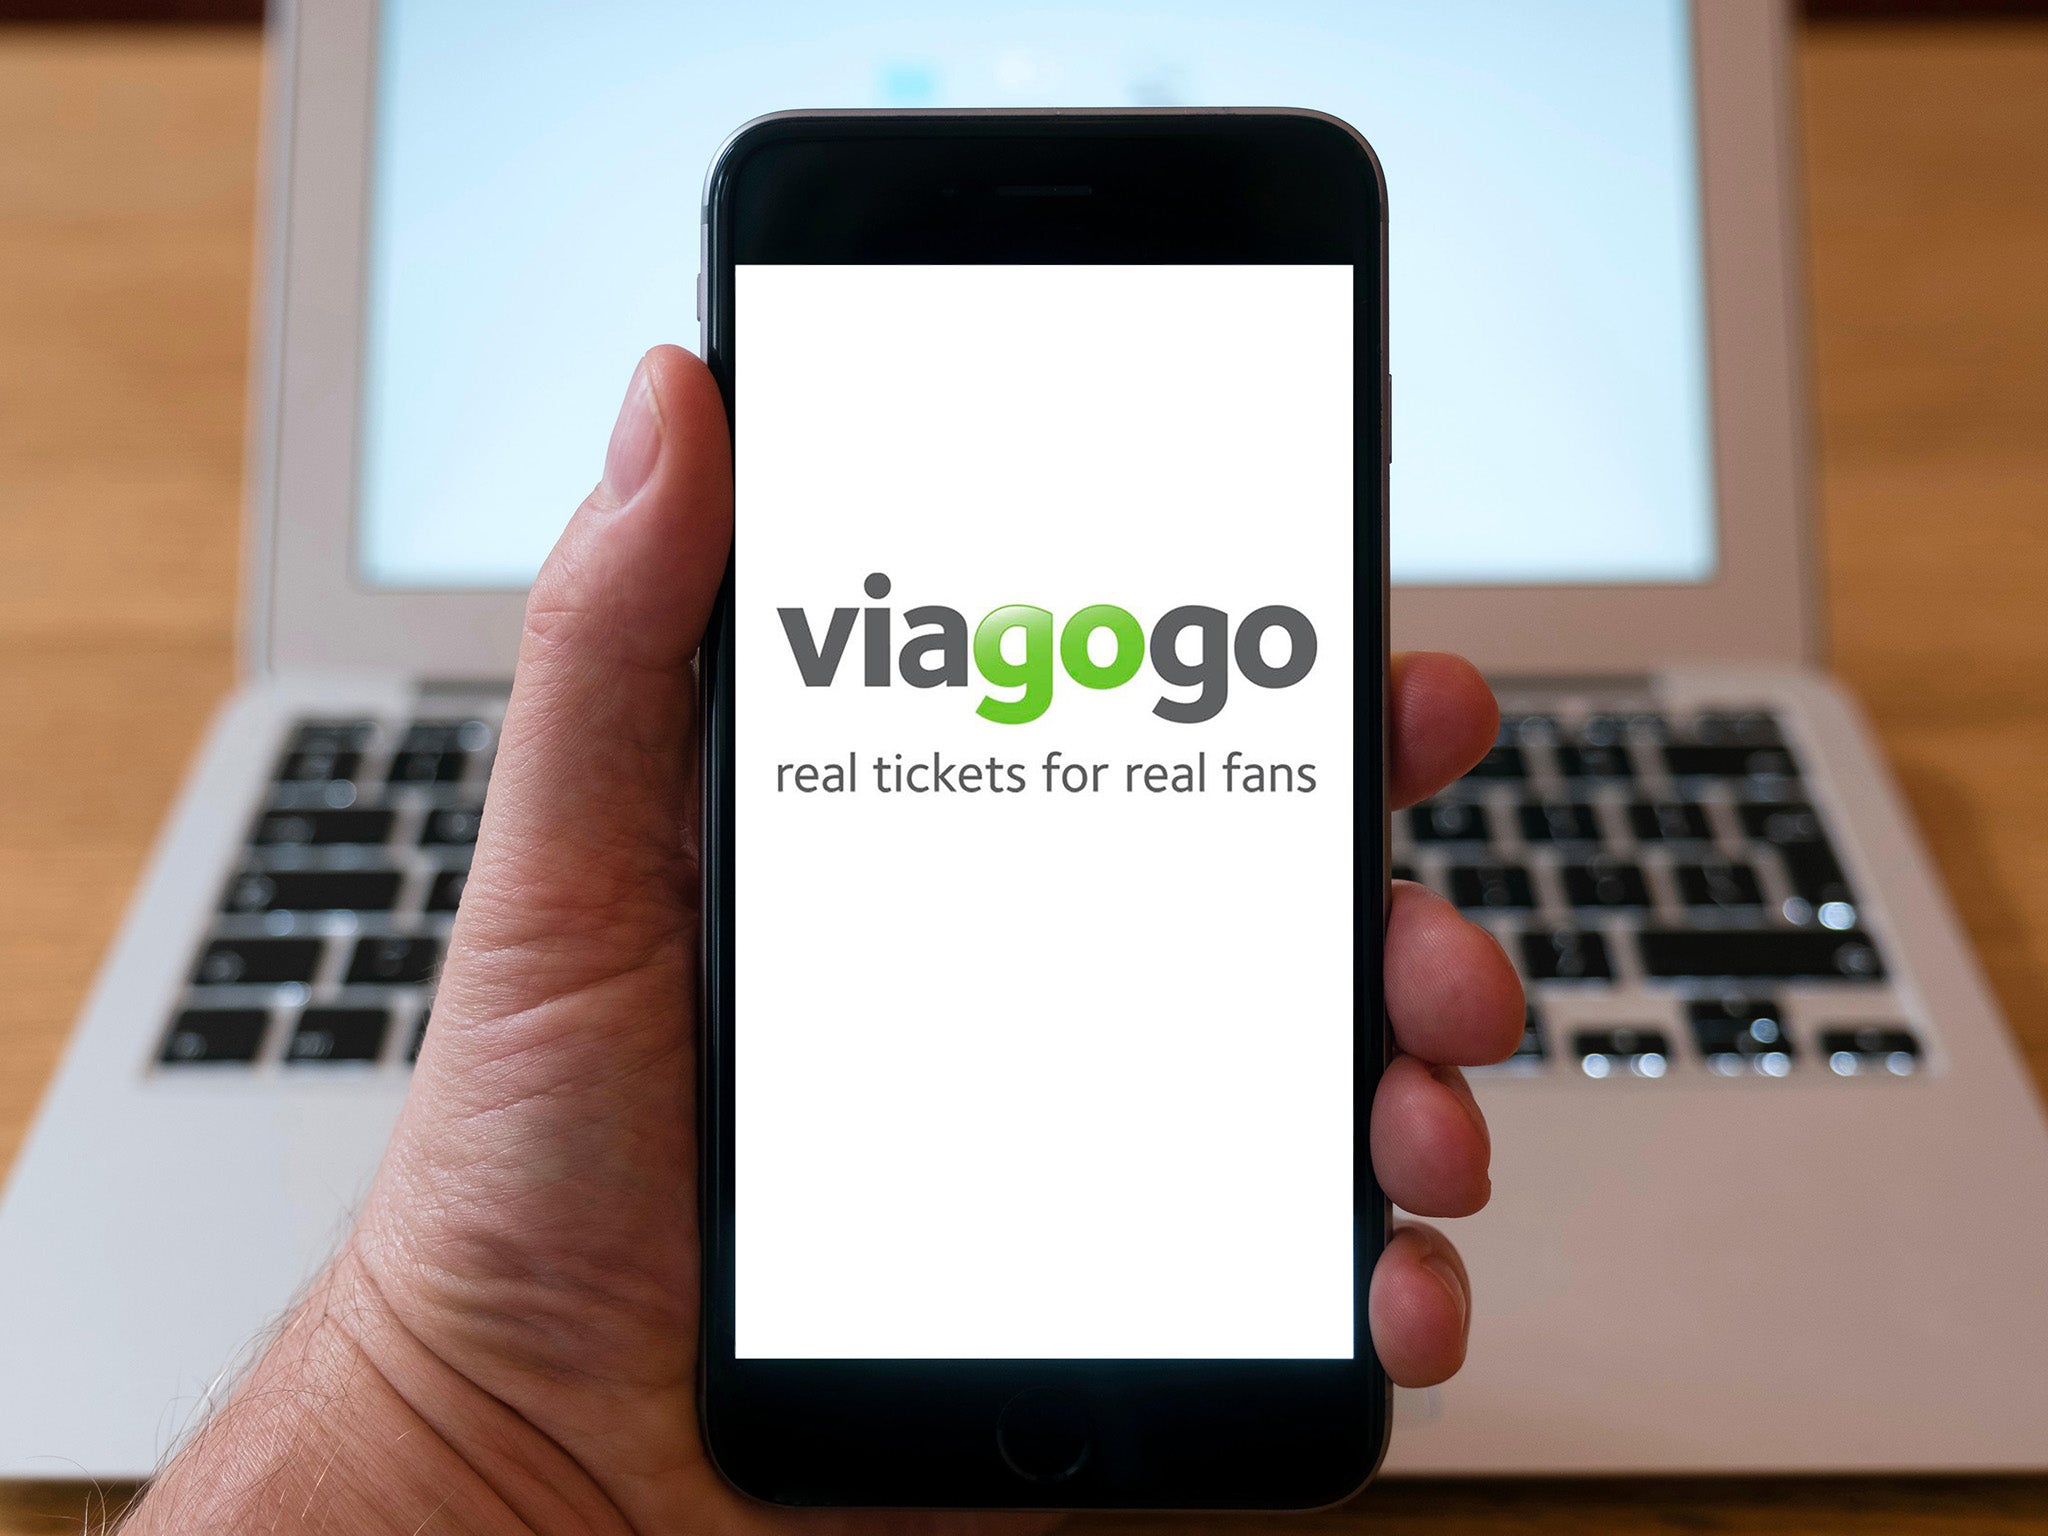 Often, Viagogo’s adverts are placed above the venue selling the tickets first hand, causing confusion, a letter to Google states